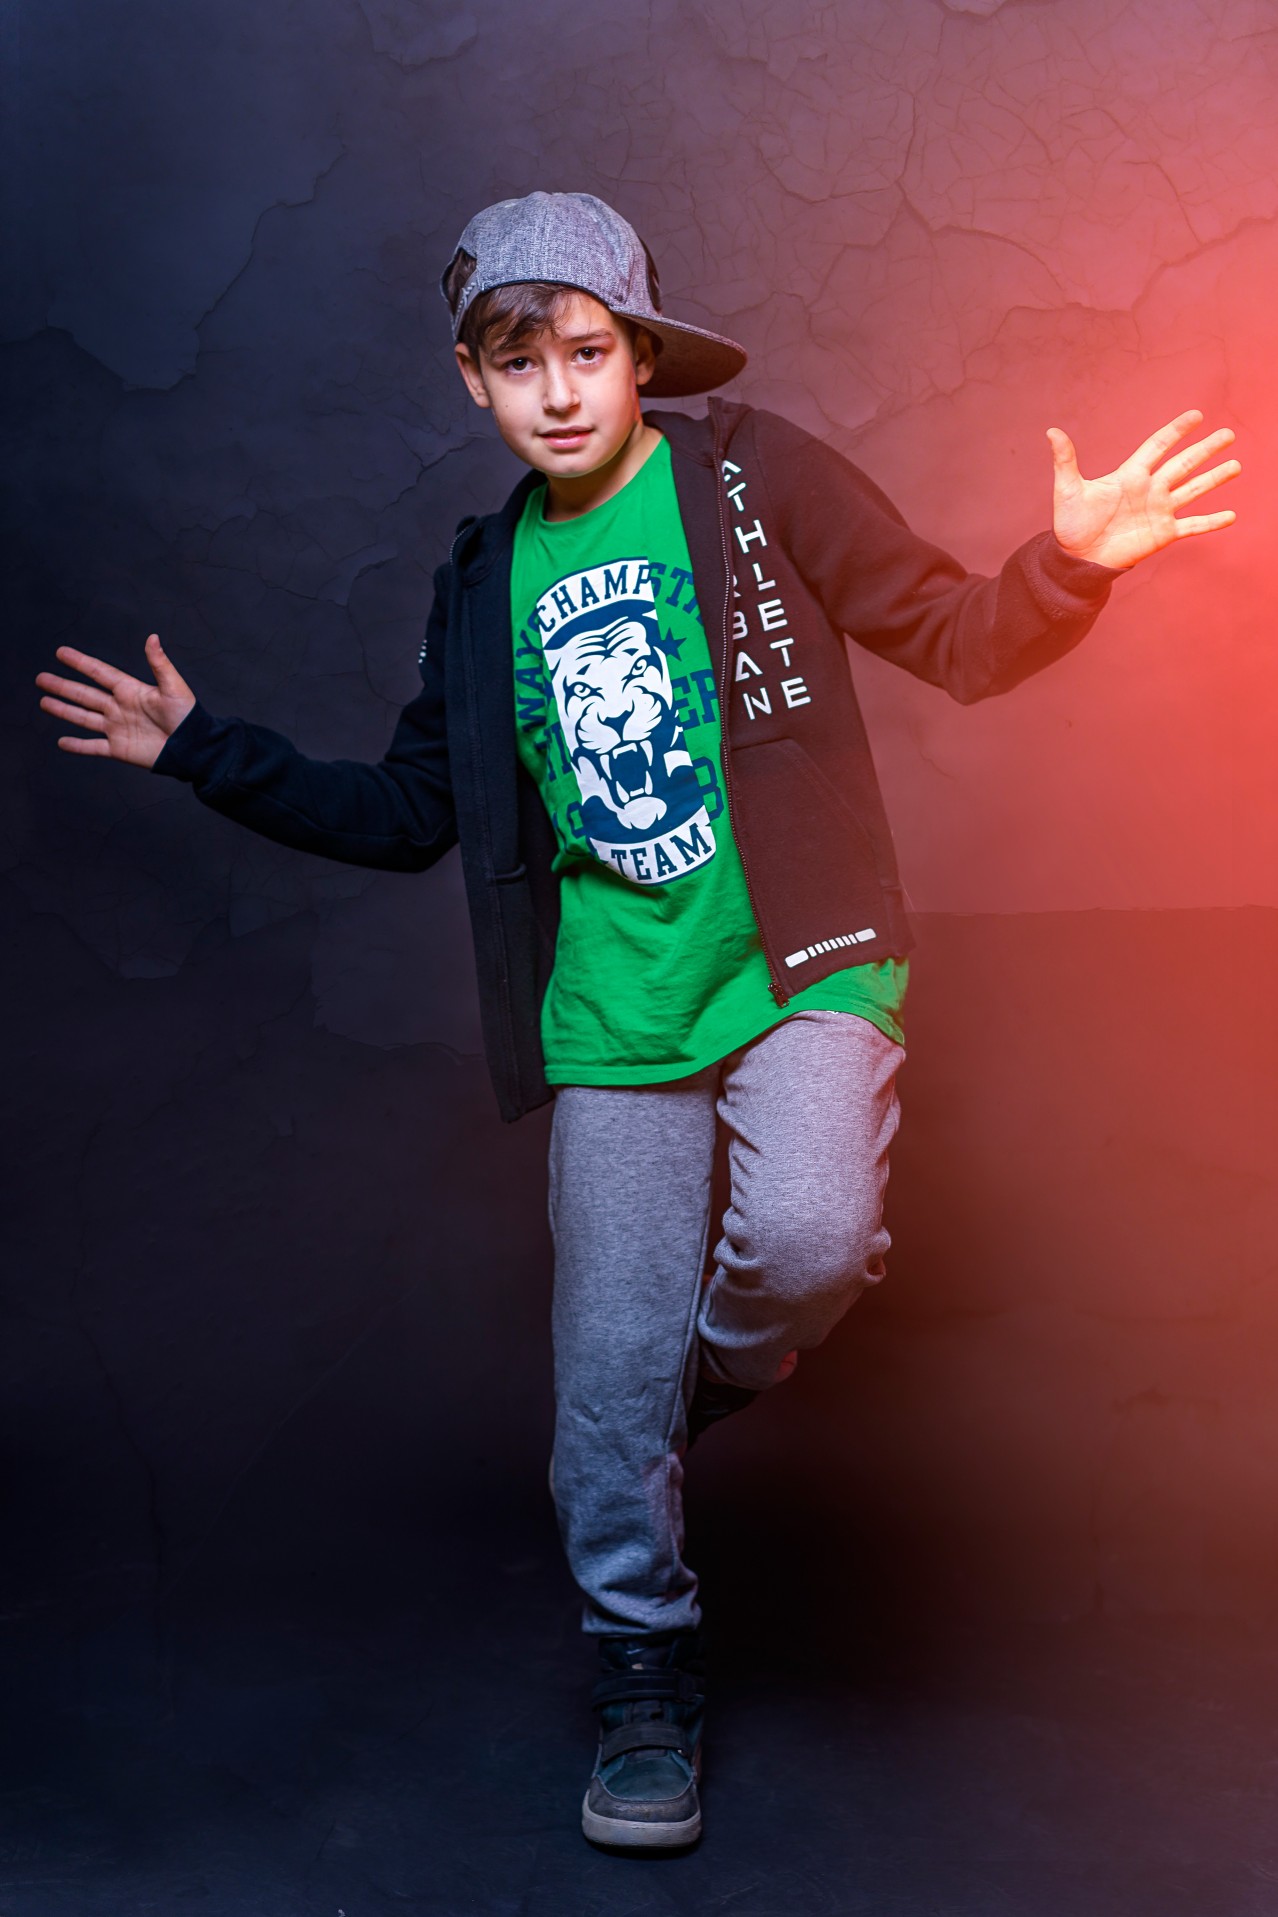 Kid in hip hop outfit posing on dark background